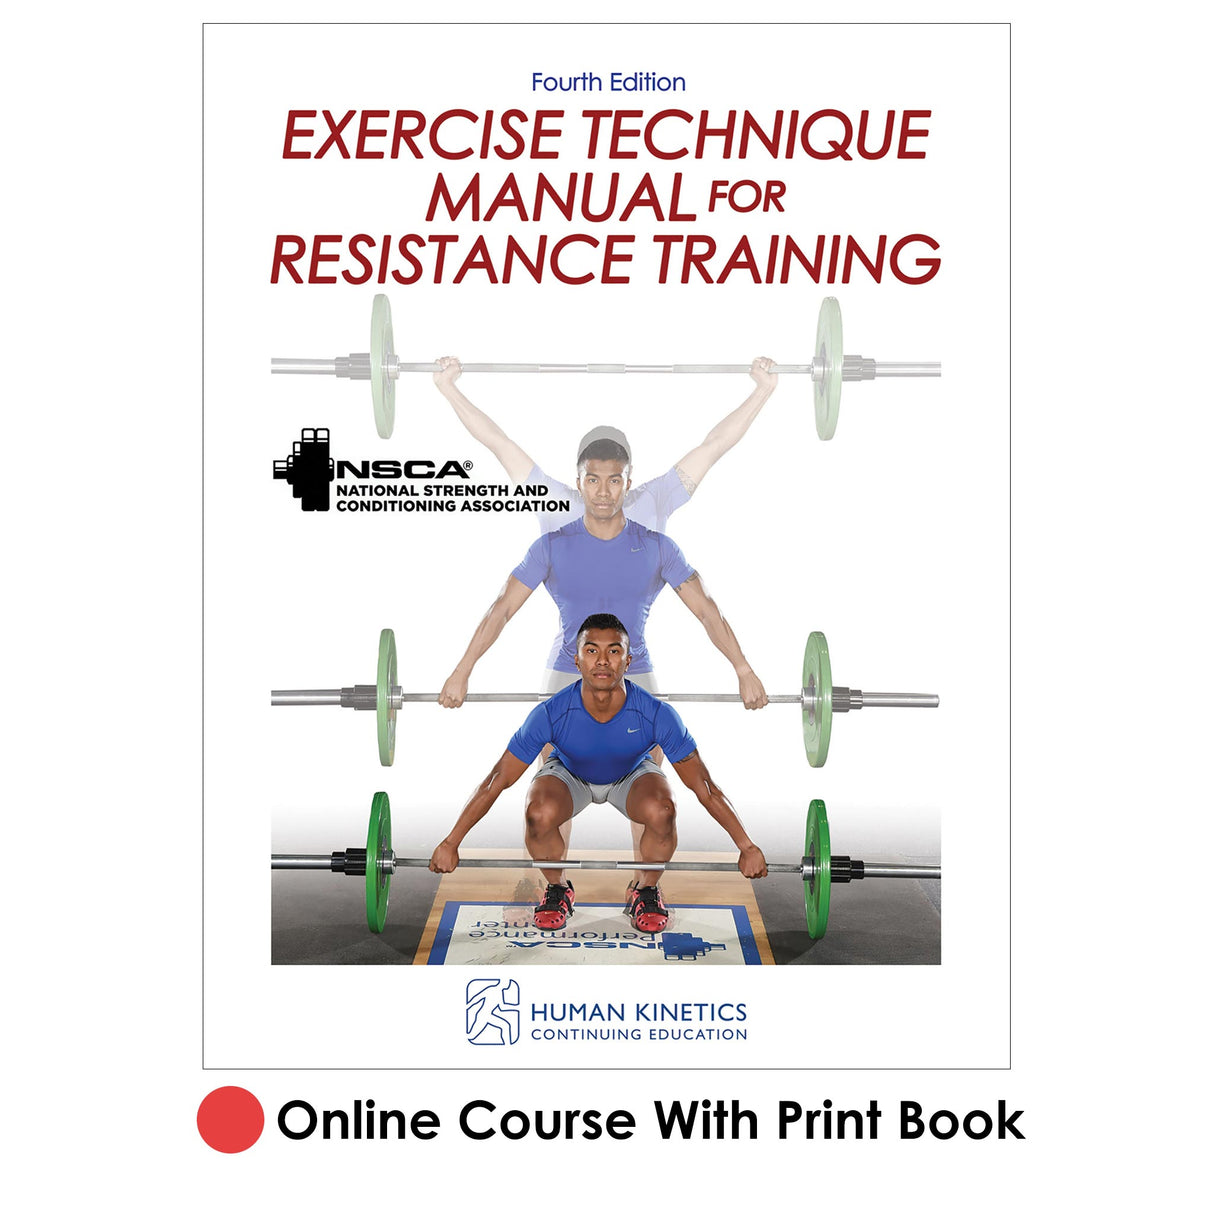 Exercise Technique Manual for Resistance Training 4th Edition Online CE Course With Print Book